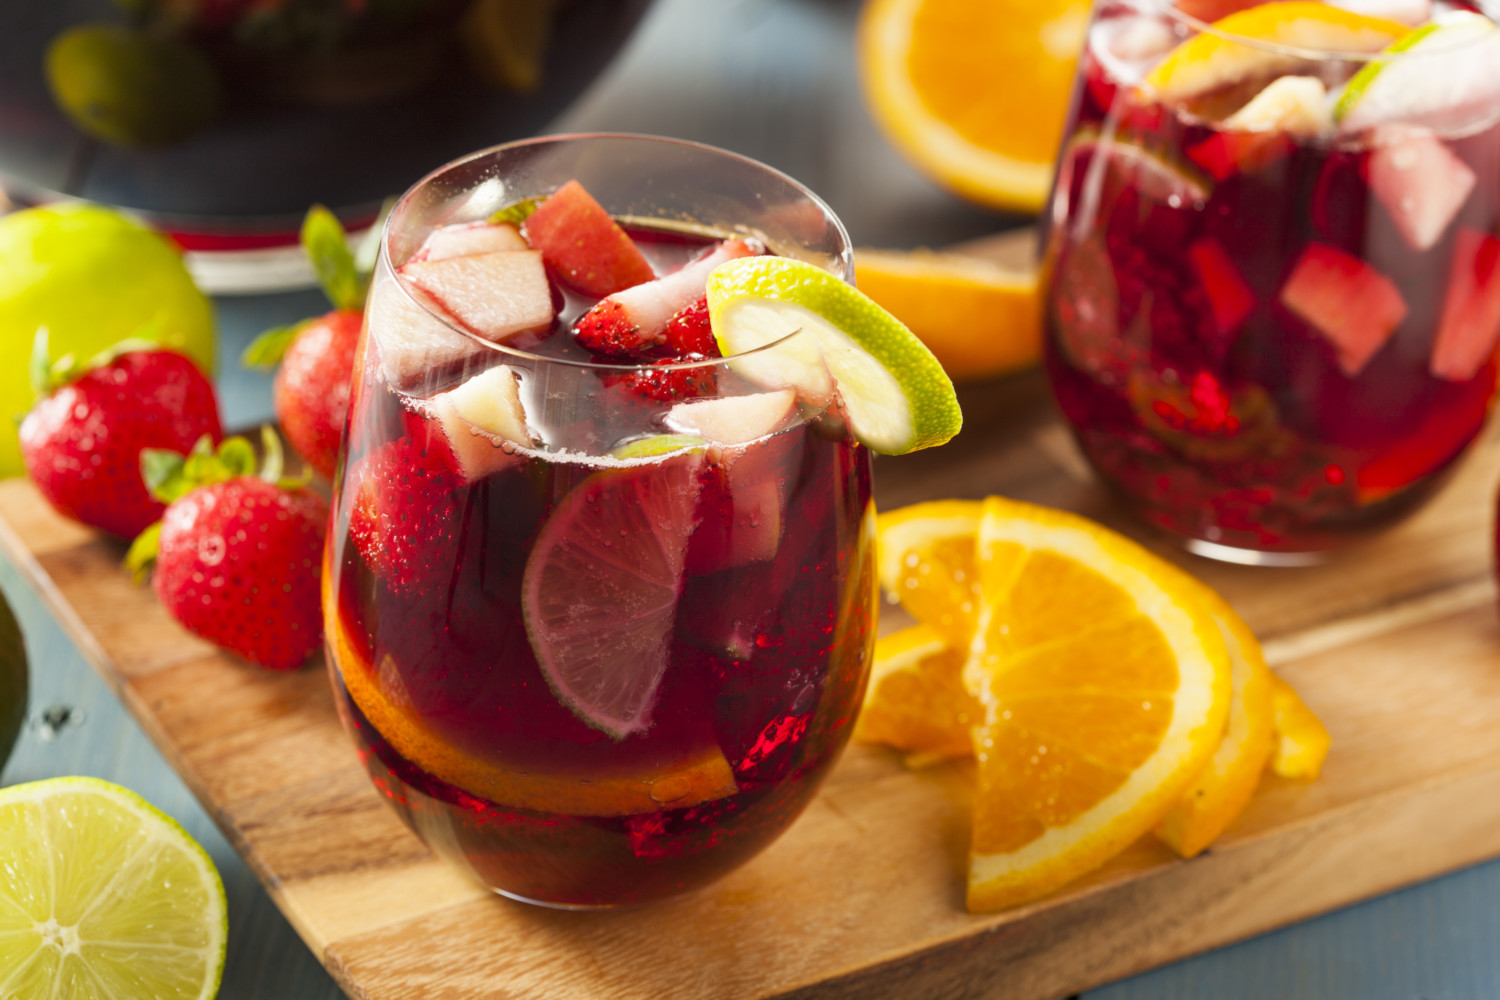 sangria - one of the most popular cocktails in the world